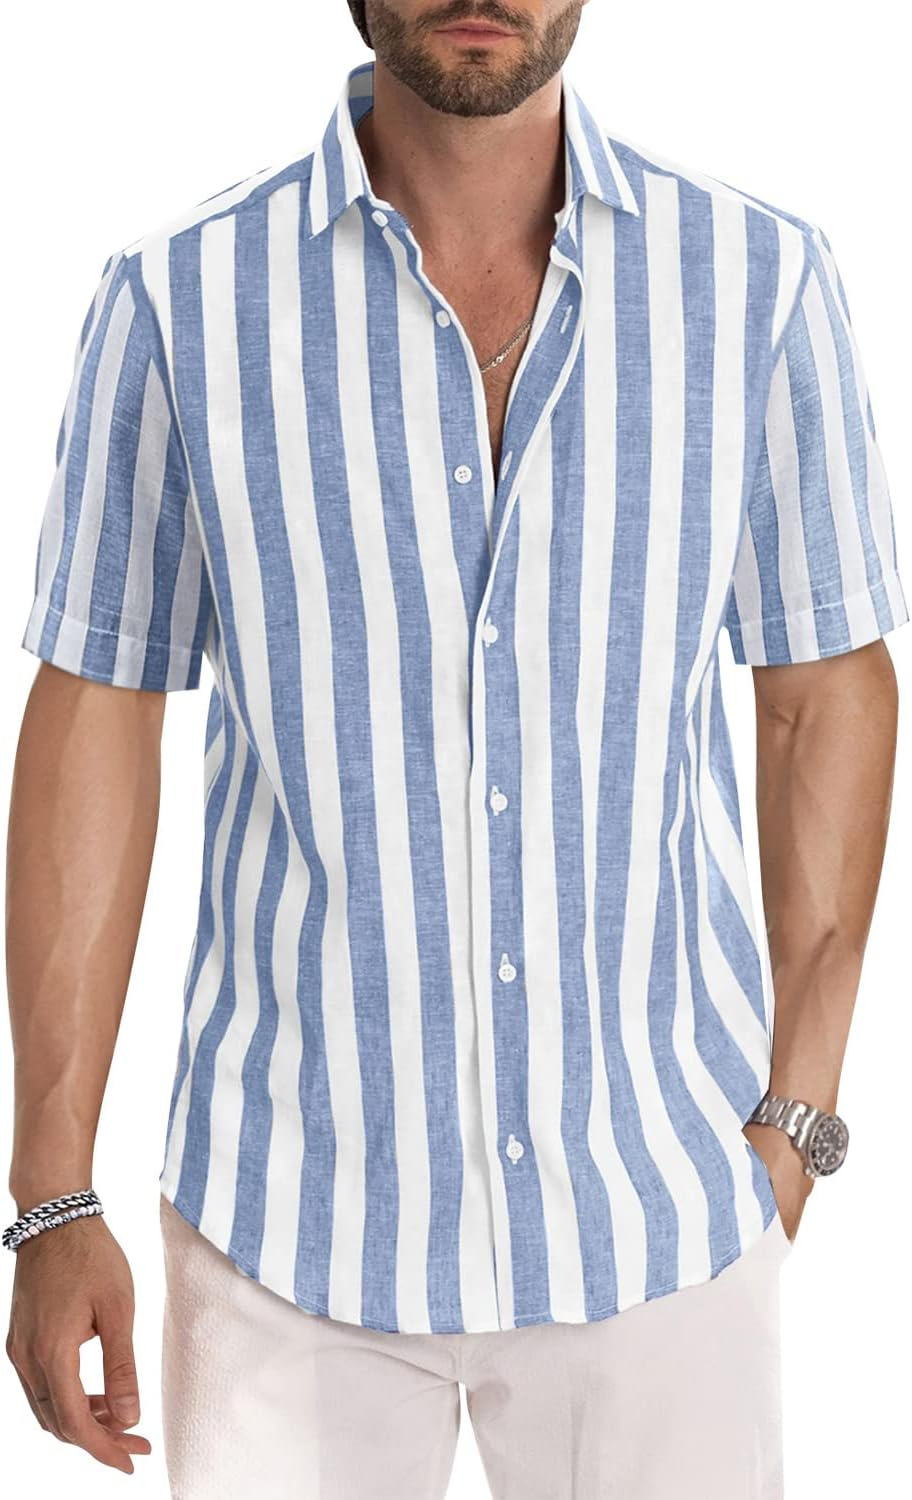 Men\'s Casual Stylish Short Sleeve Cotton Button-Up Striped Dress Shirts